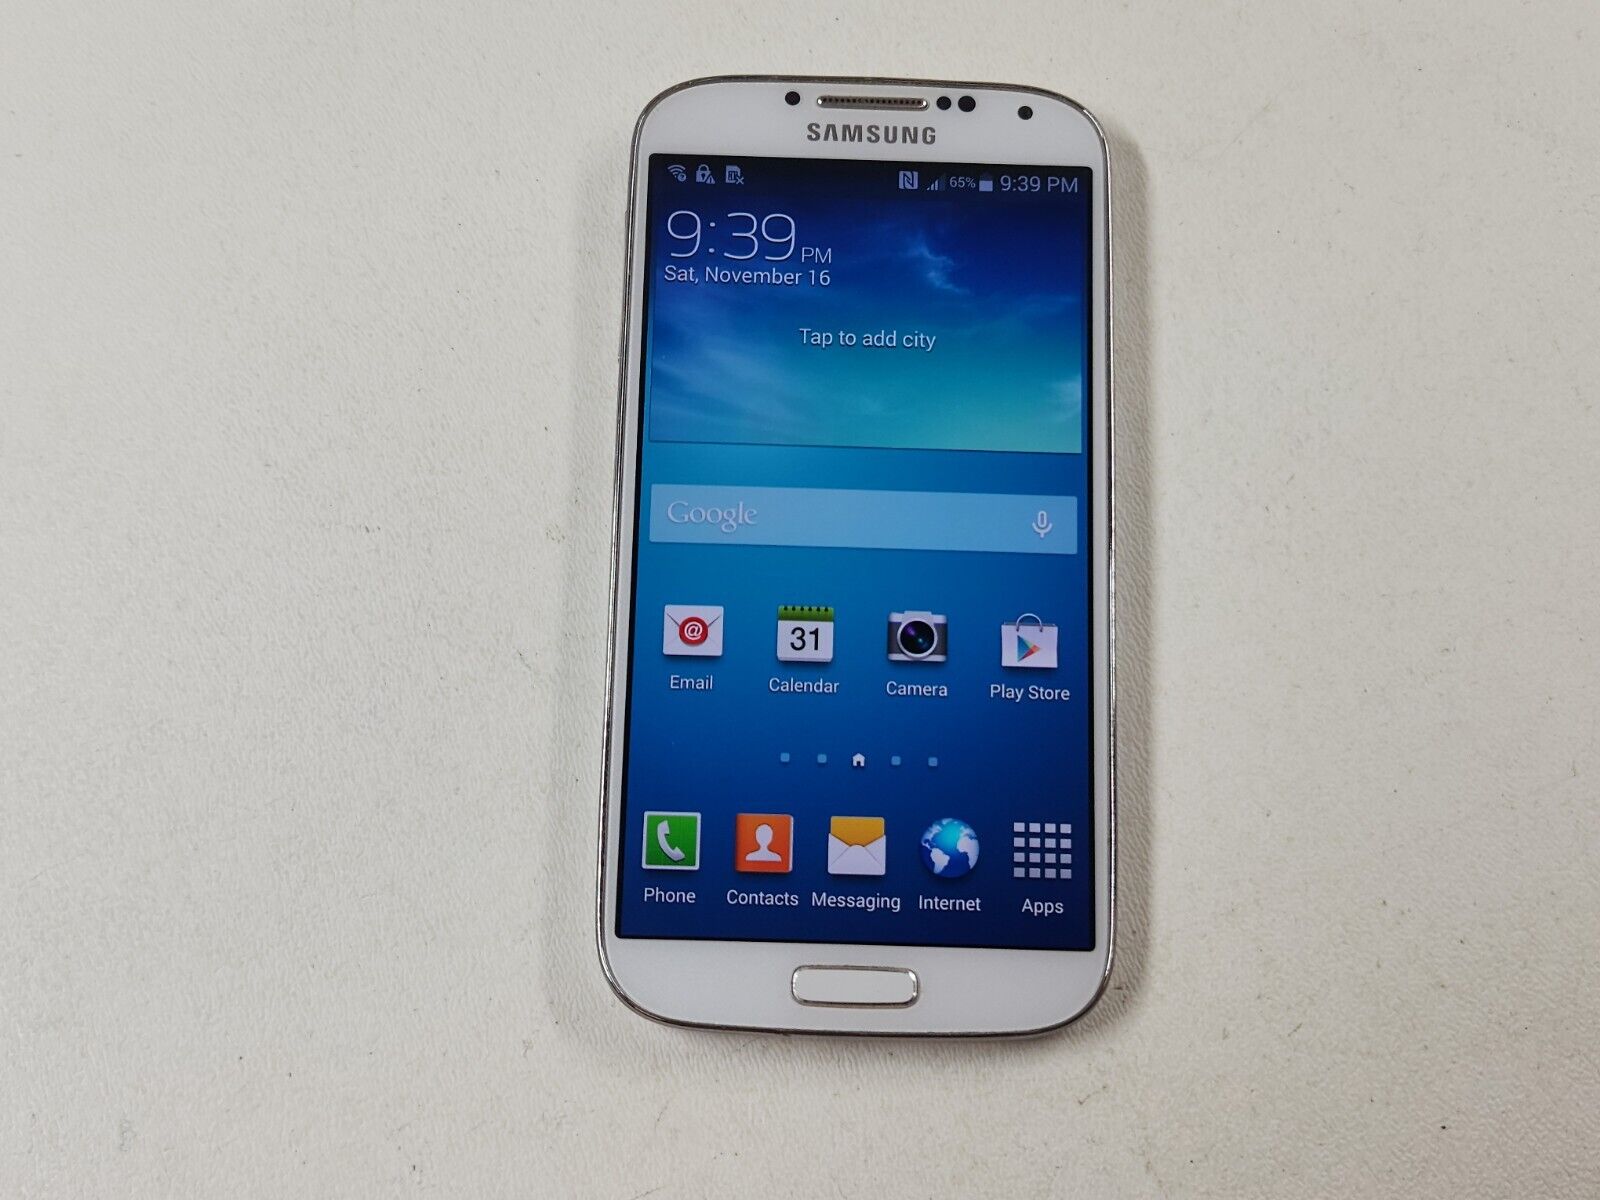 How To Root Galaxy S4 T-Mobile Sgh-M919 | CellularNews